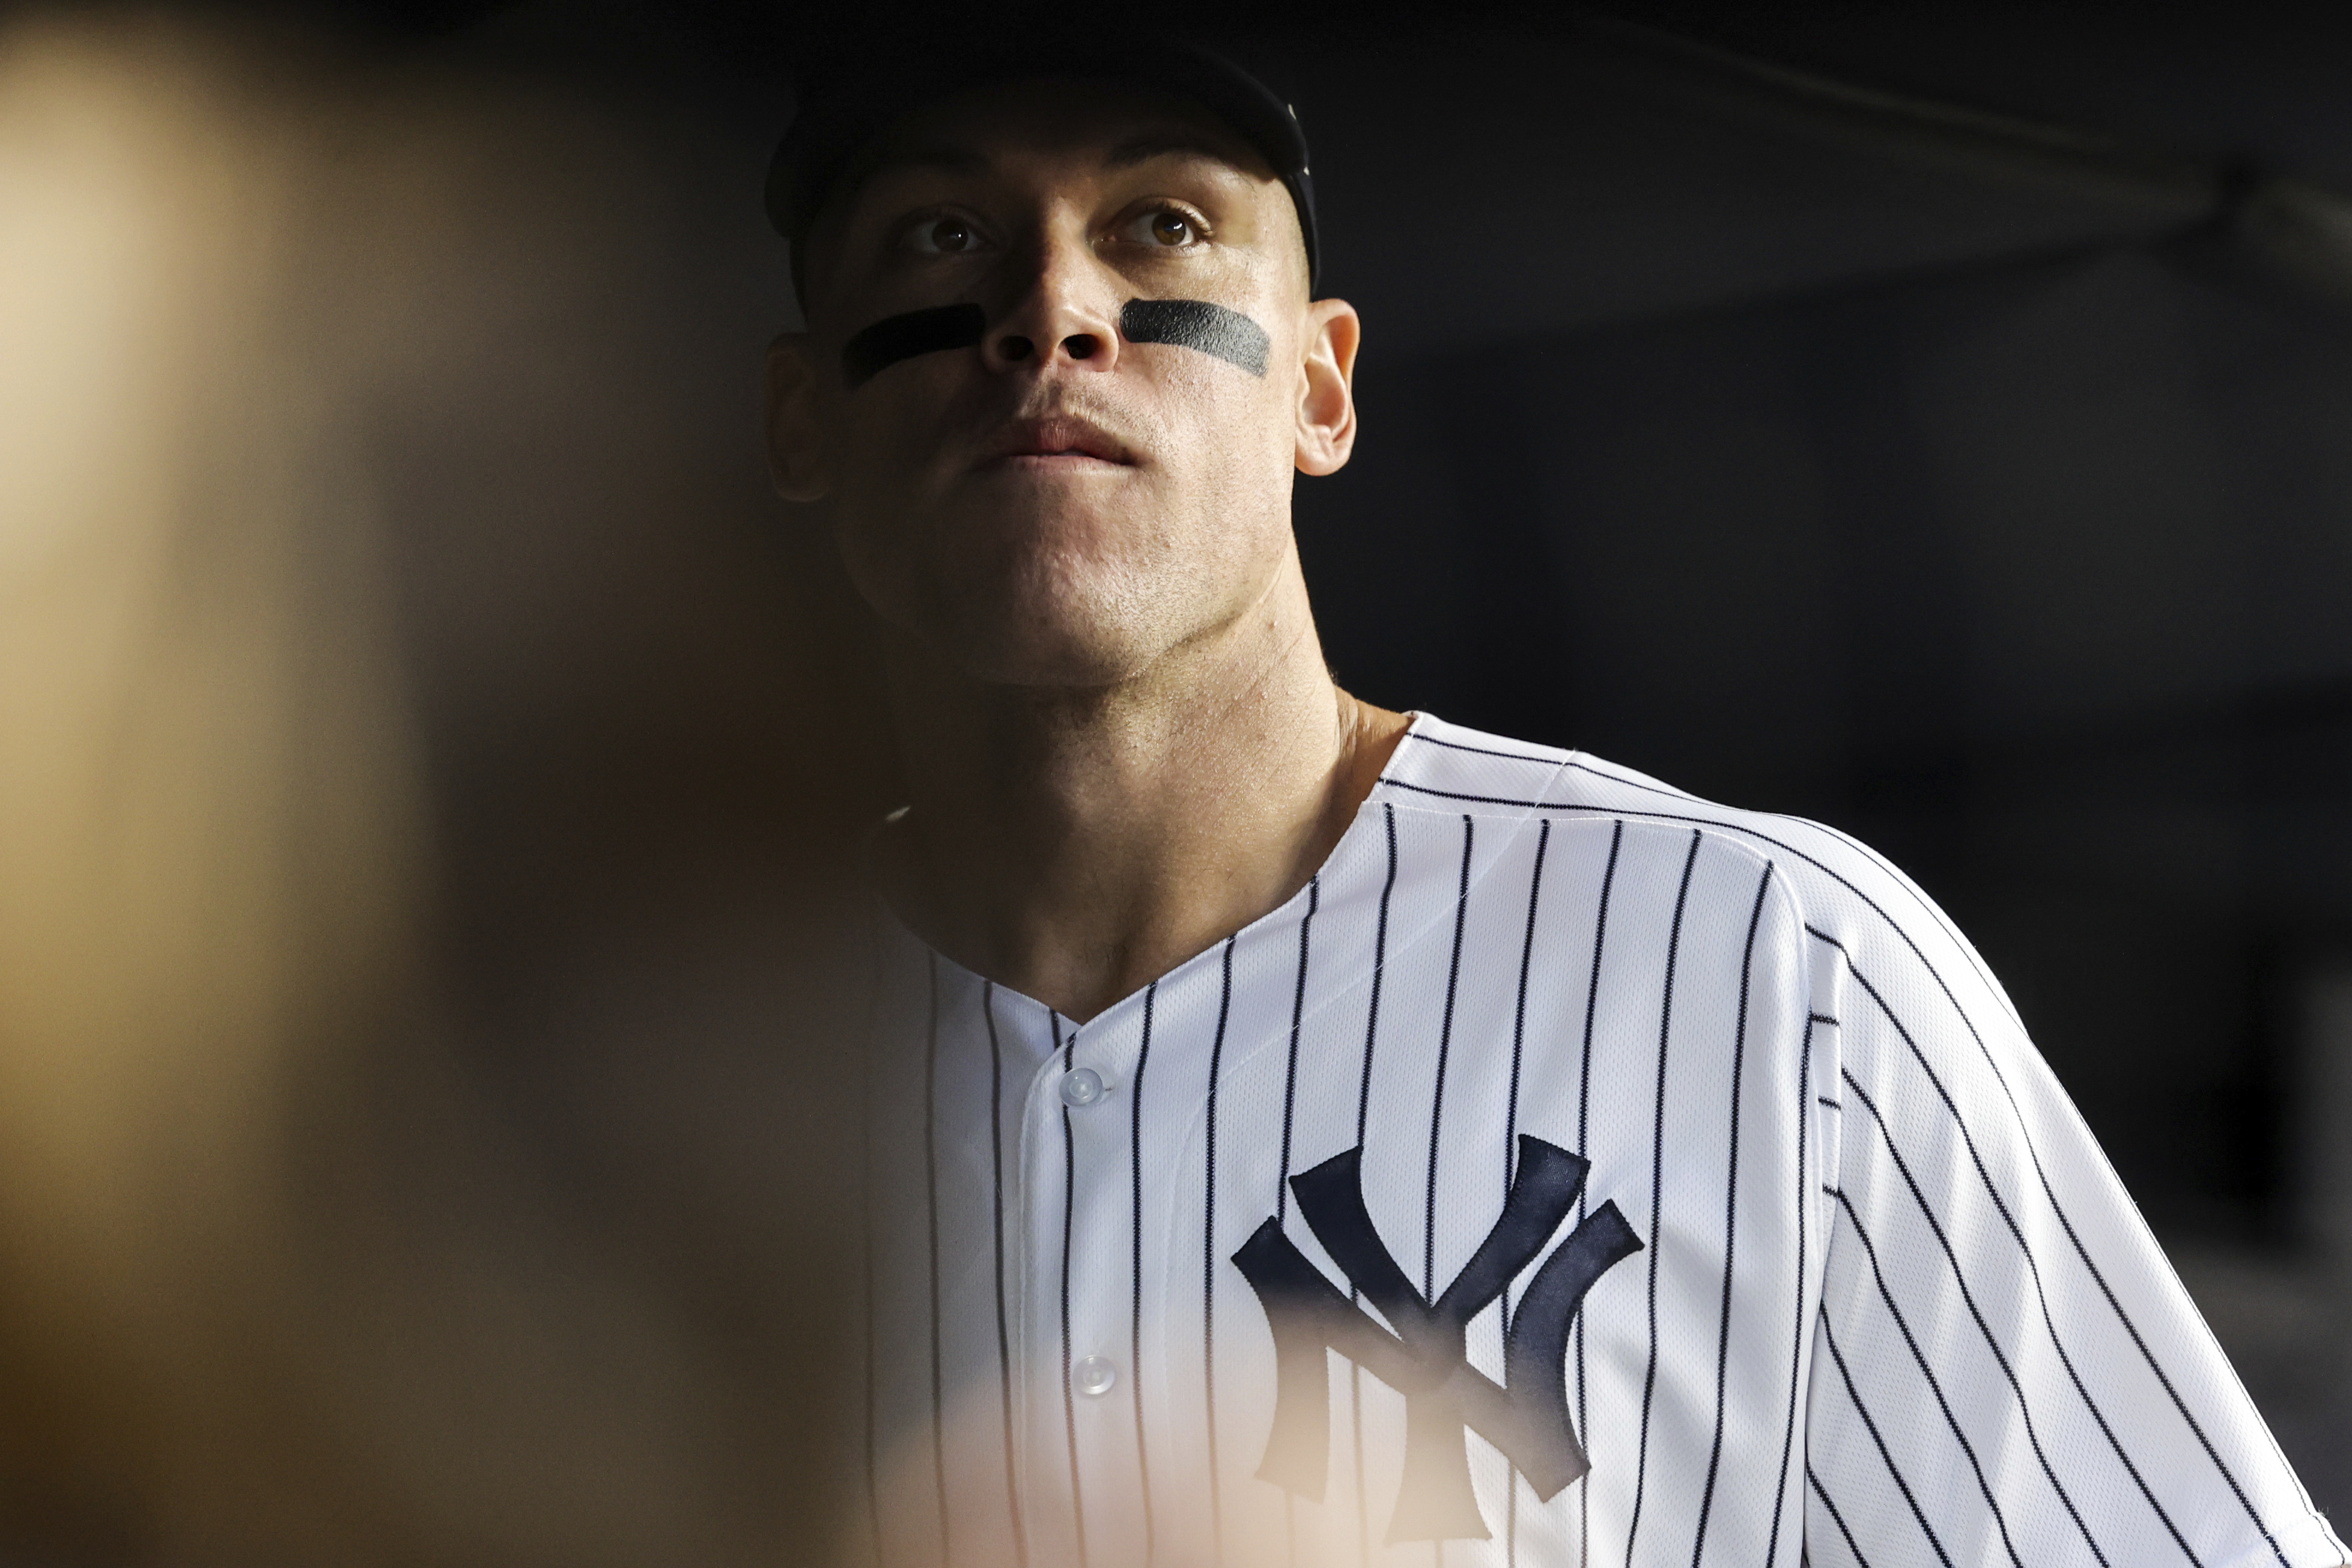 Yankees win Saturday, big day for Aaron Judge on deck